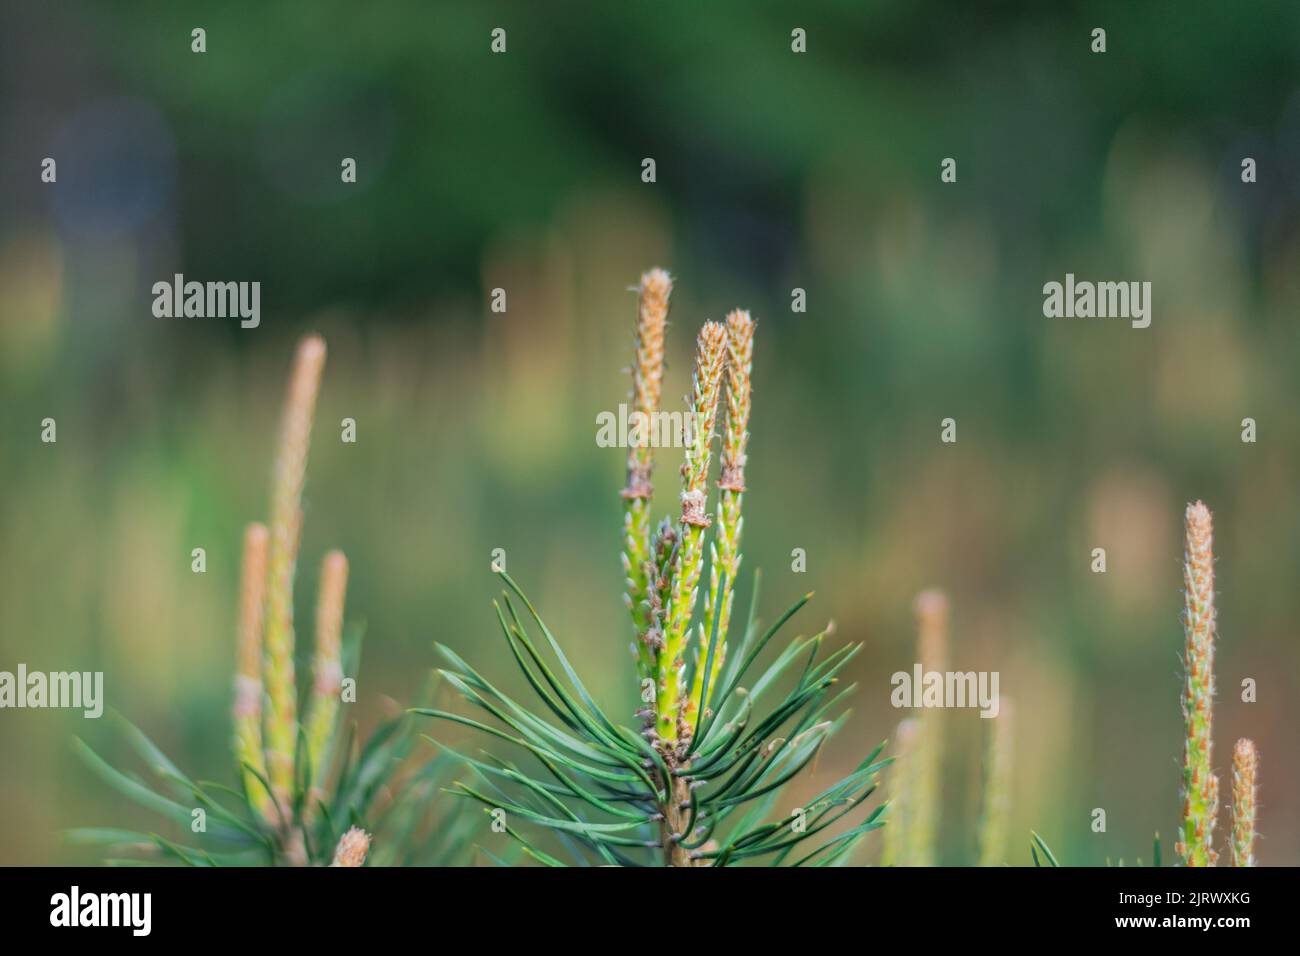 Green Pine tree blooming with bokeh background Stock Photo